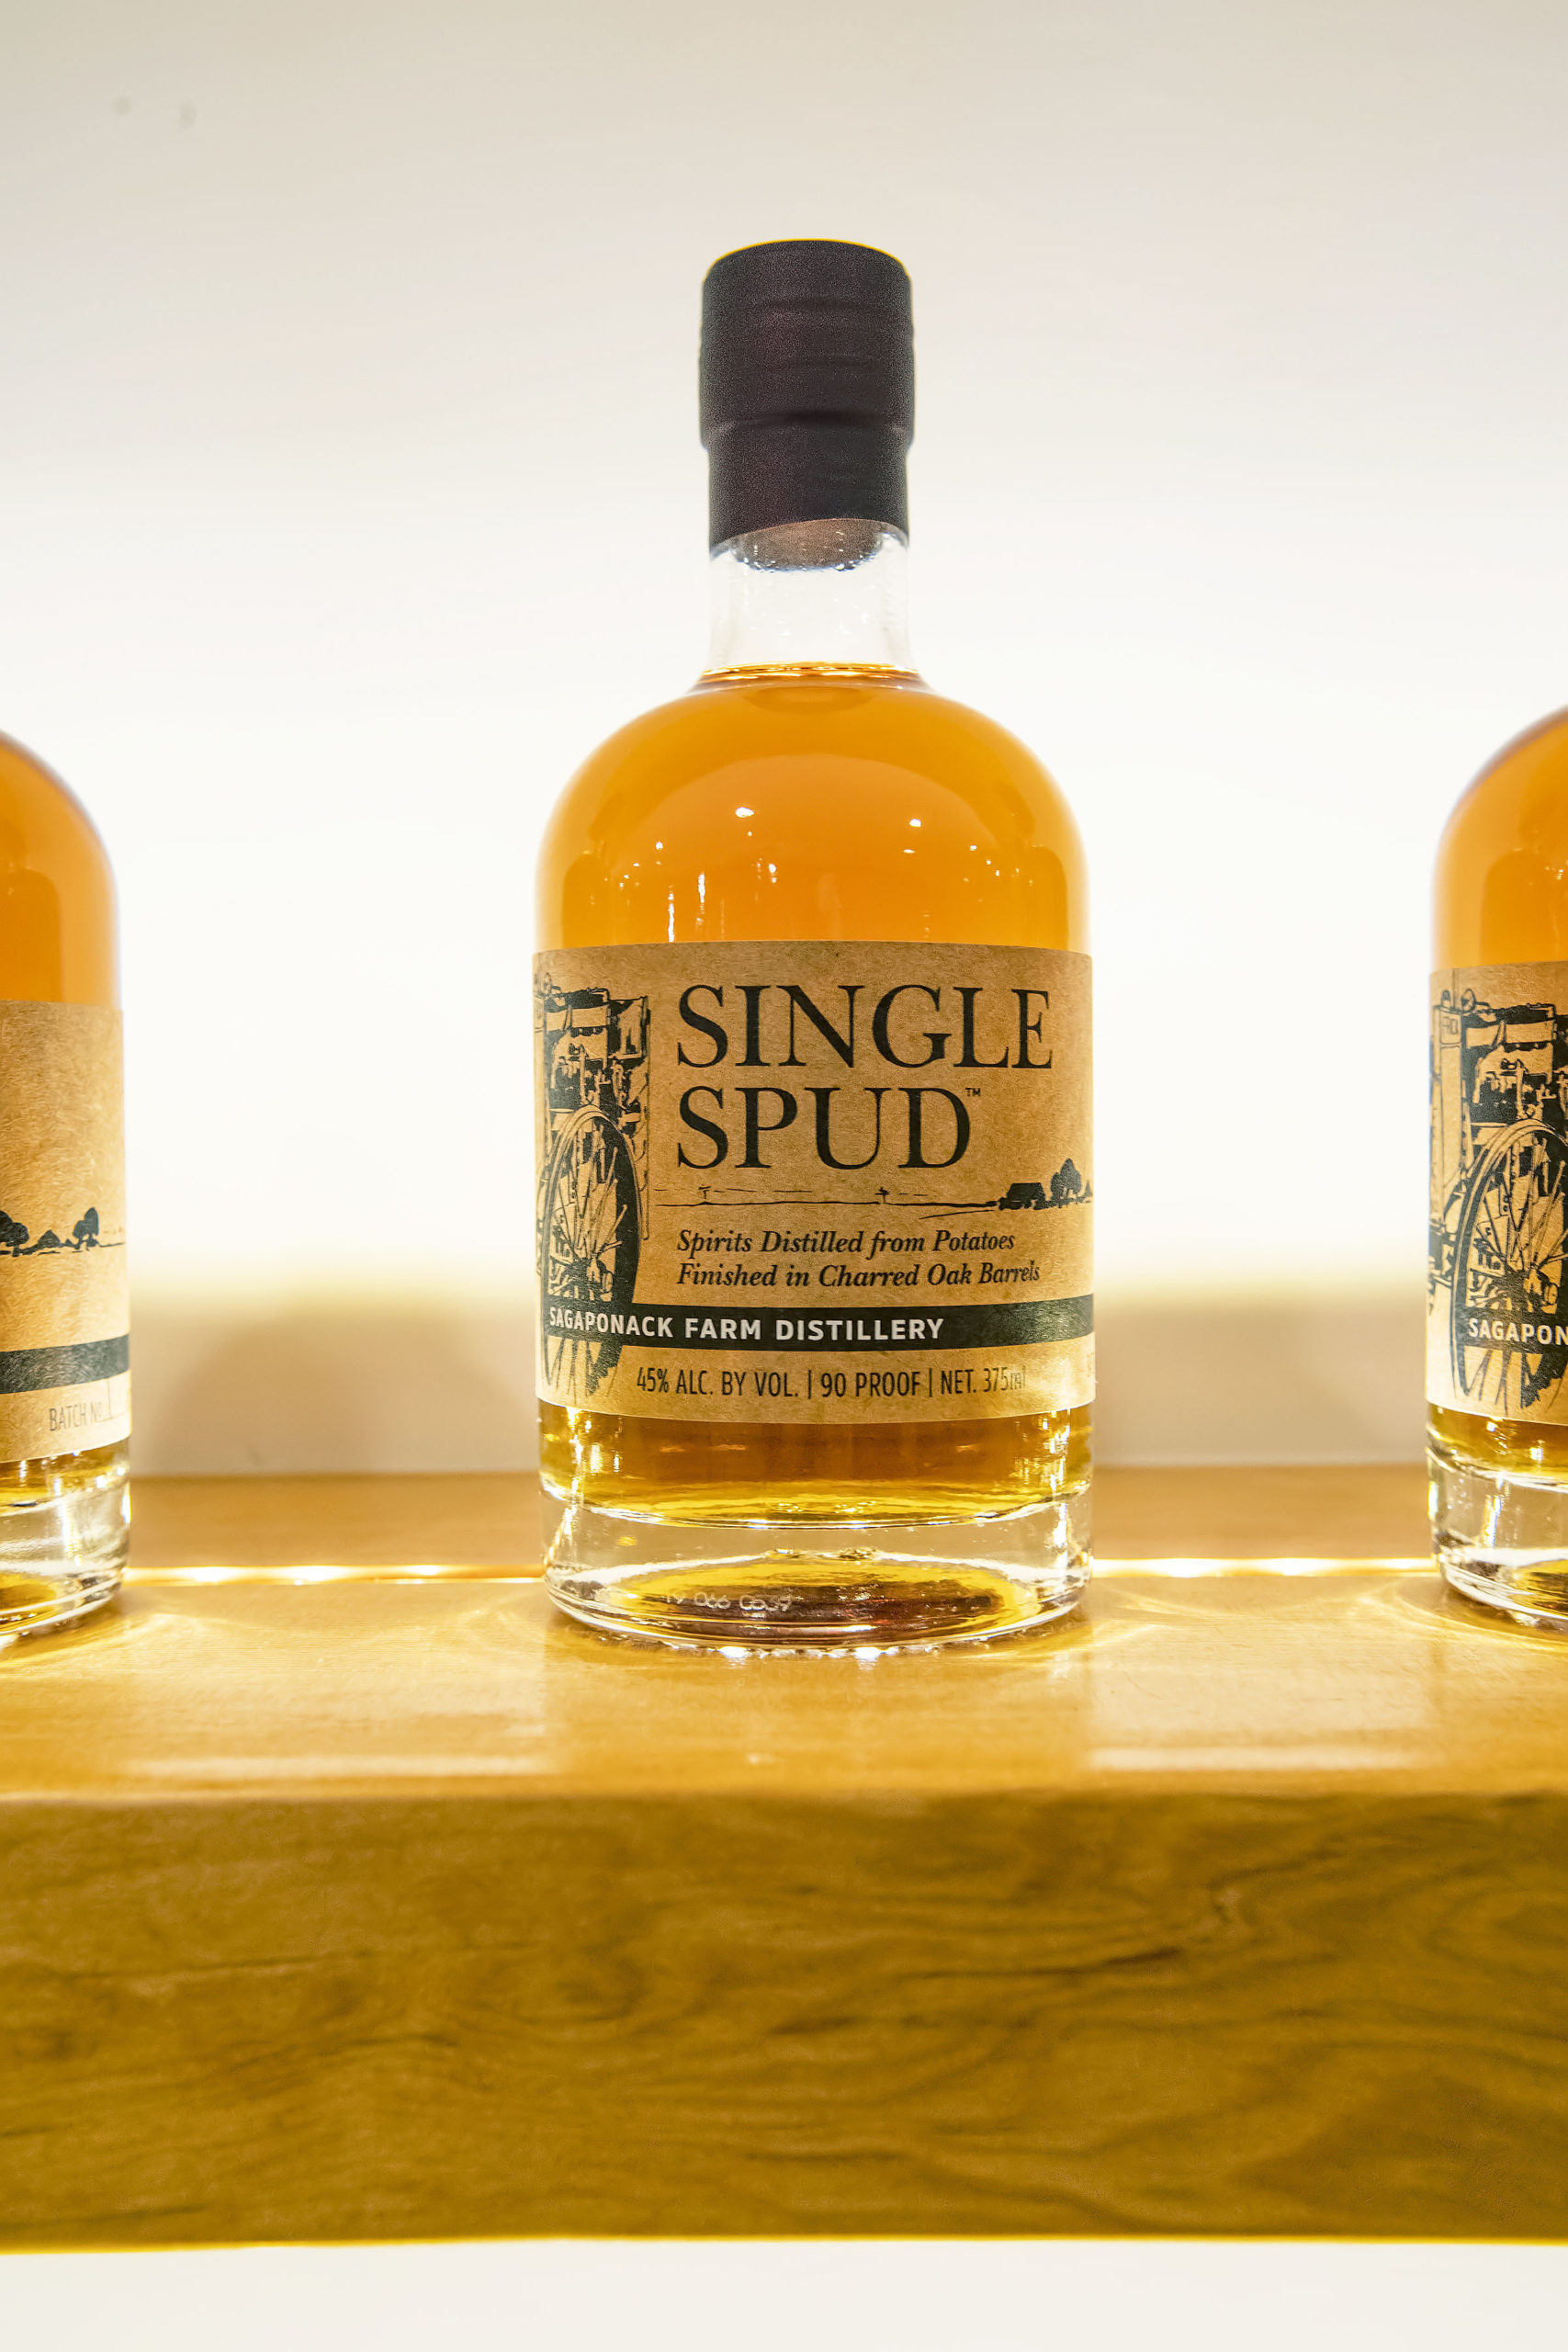 Single Spud, a spirit distilled from potatoes and finished in an oak barrel.
MICHAEL HELLER